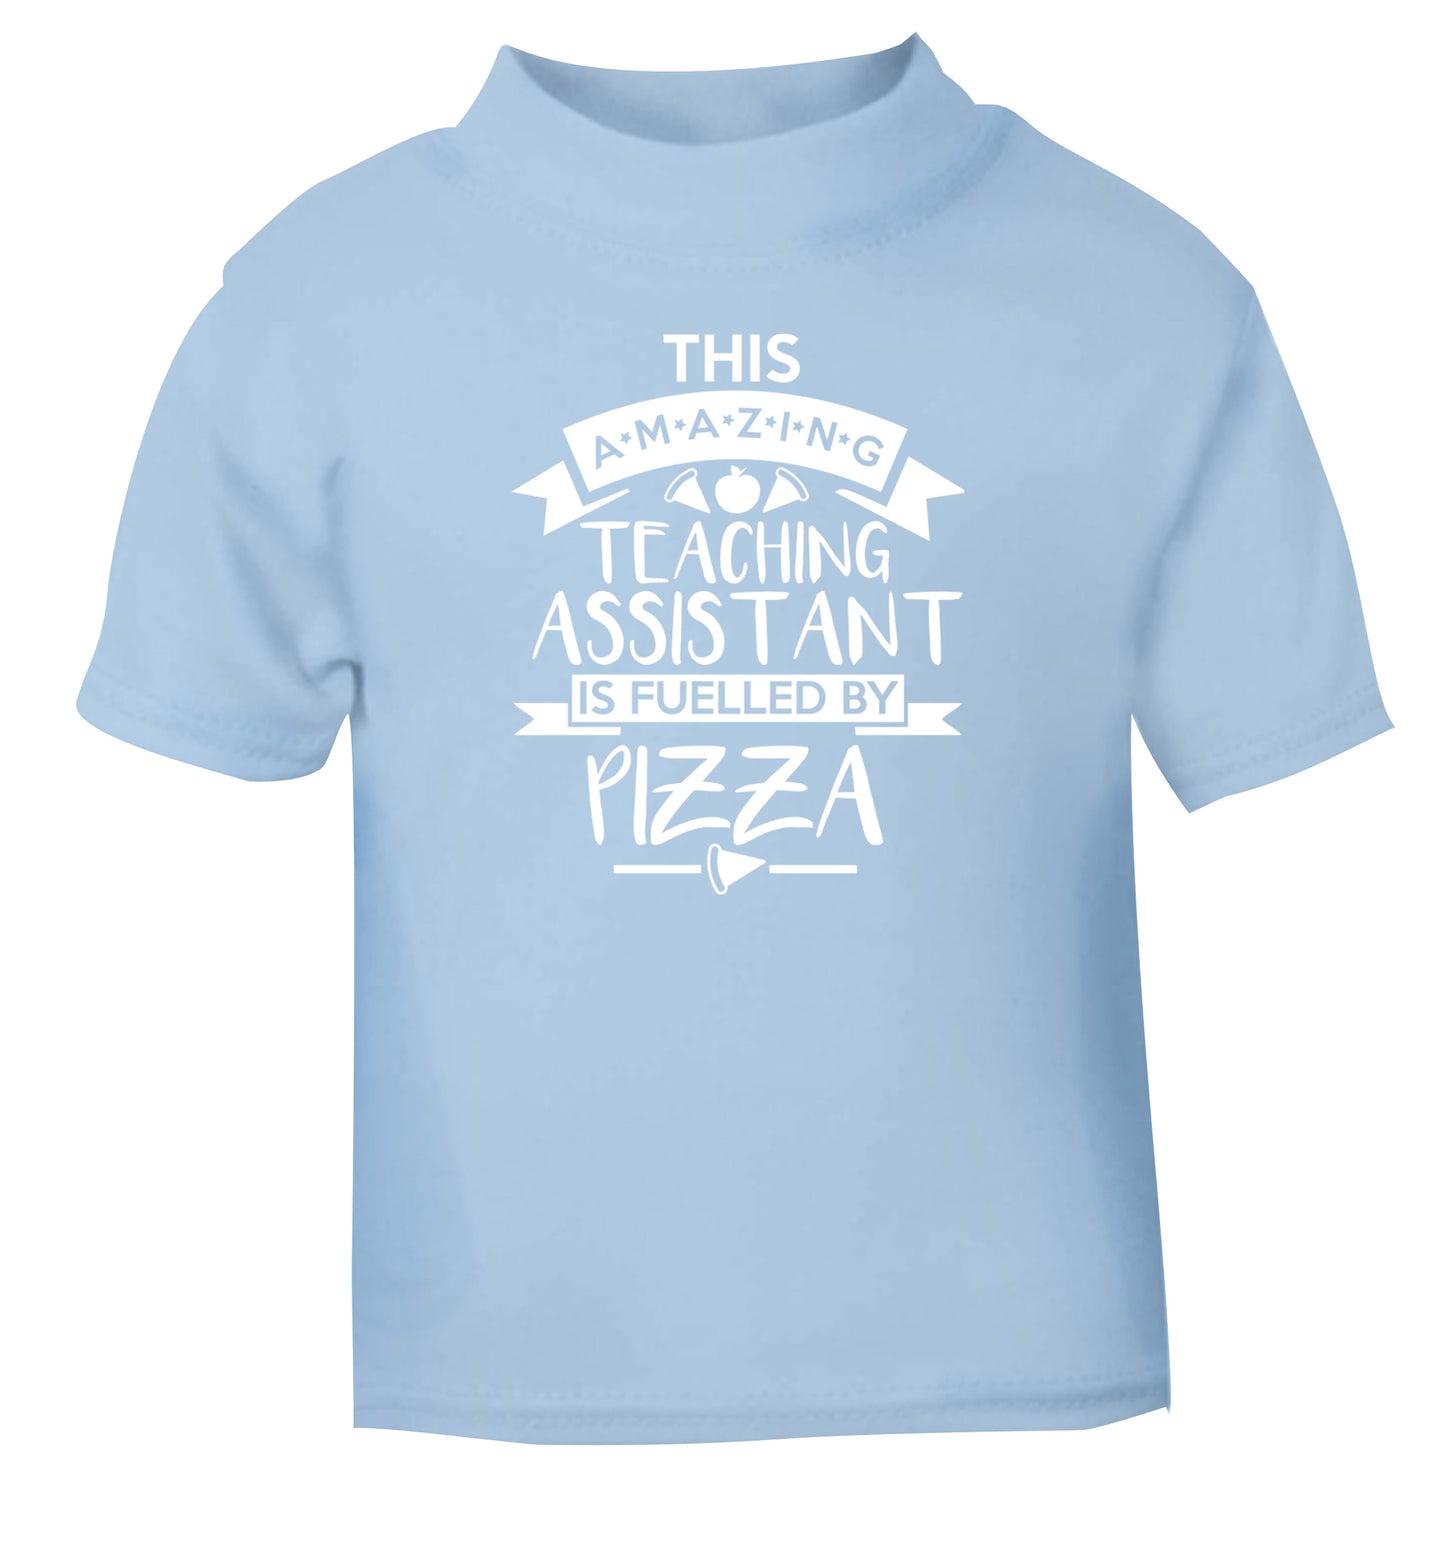 This amazing teaching assistant is fuelled by pizza light blue Baby Toddler Tshirt 2 Years